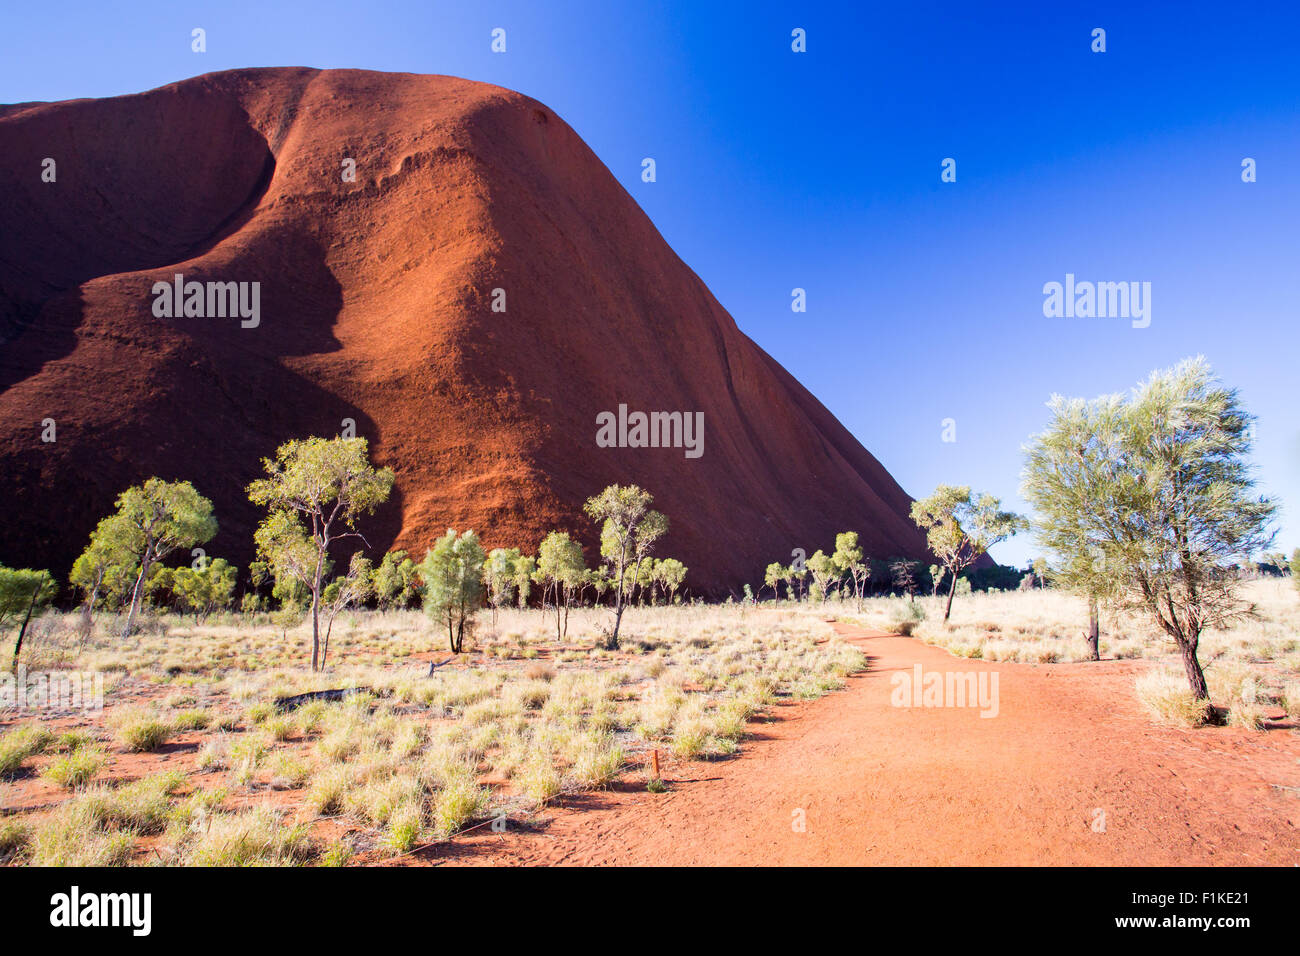 The southern face of Uluru on the Kuniya walk on a clear winter's afternoon in the Northern Territory, Australia Stock Photo